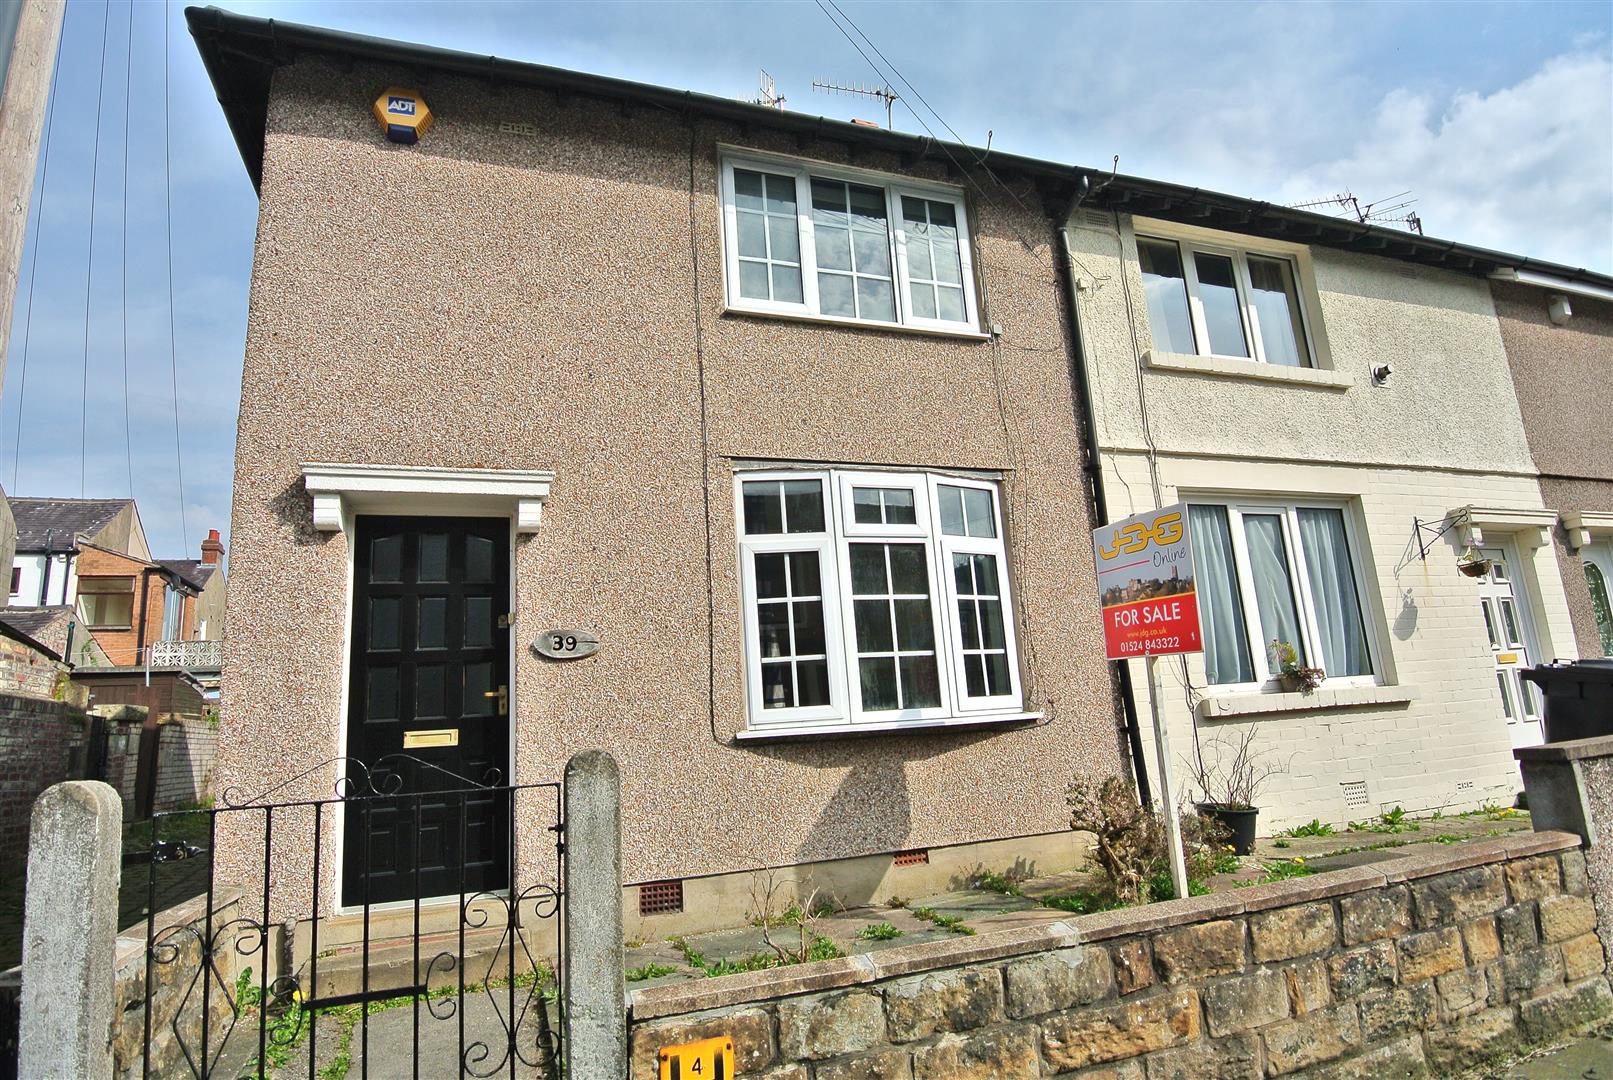 This 3 bed home in Greaves was snapped up by an investor to rent out. It sold for just £115,560